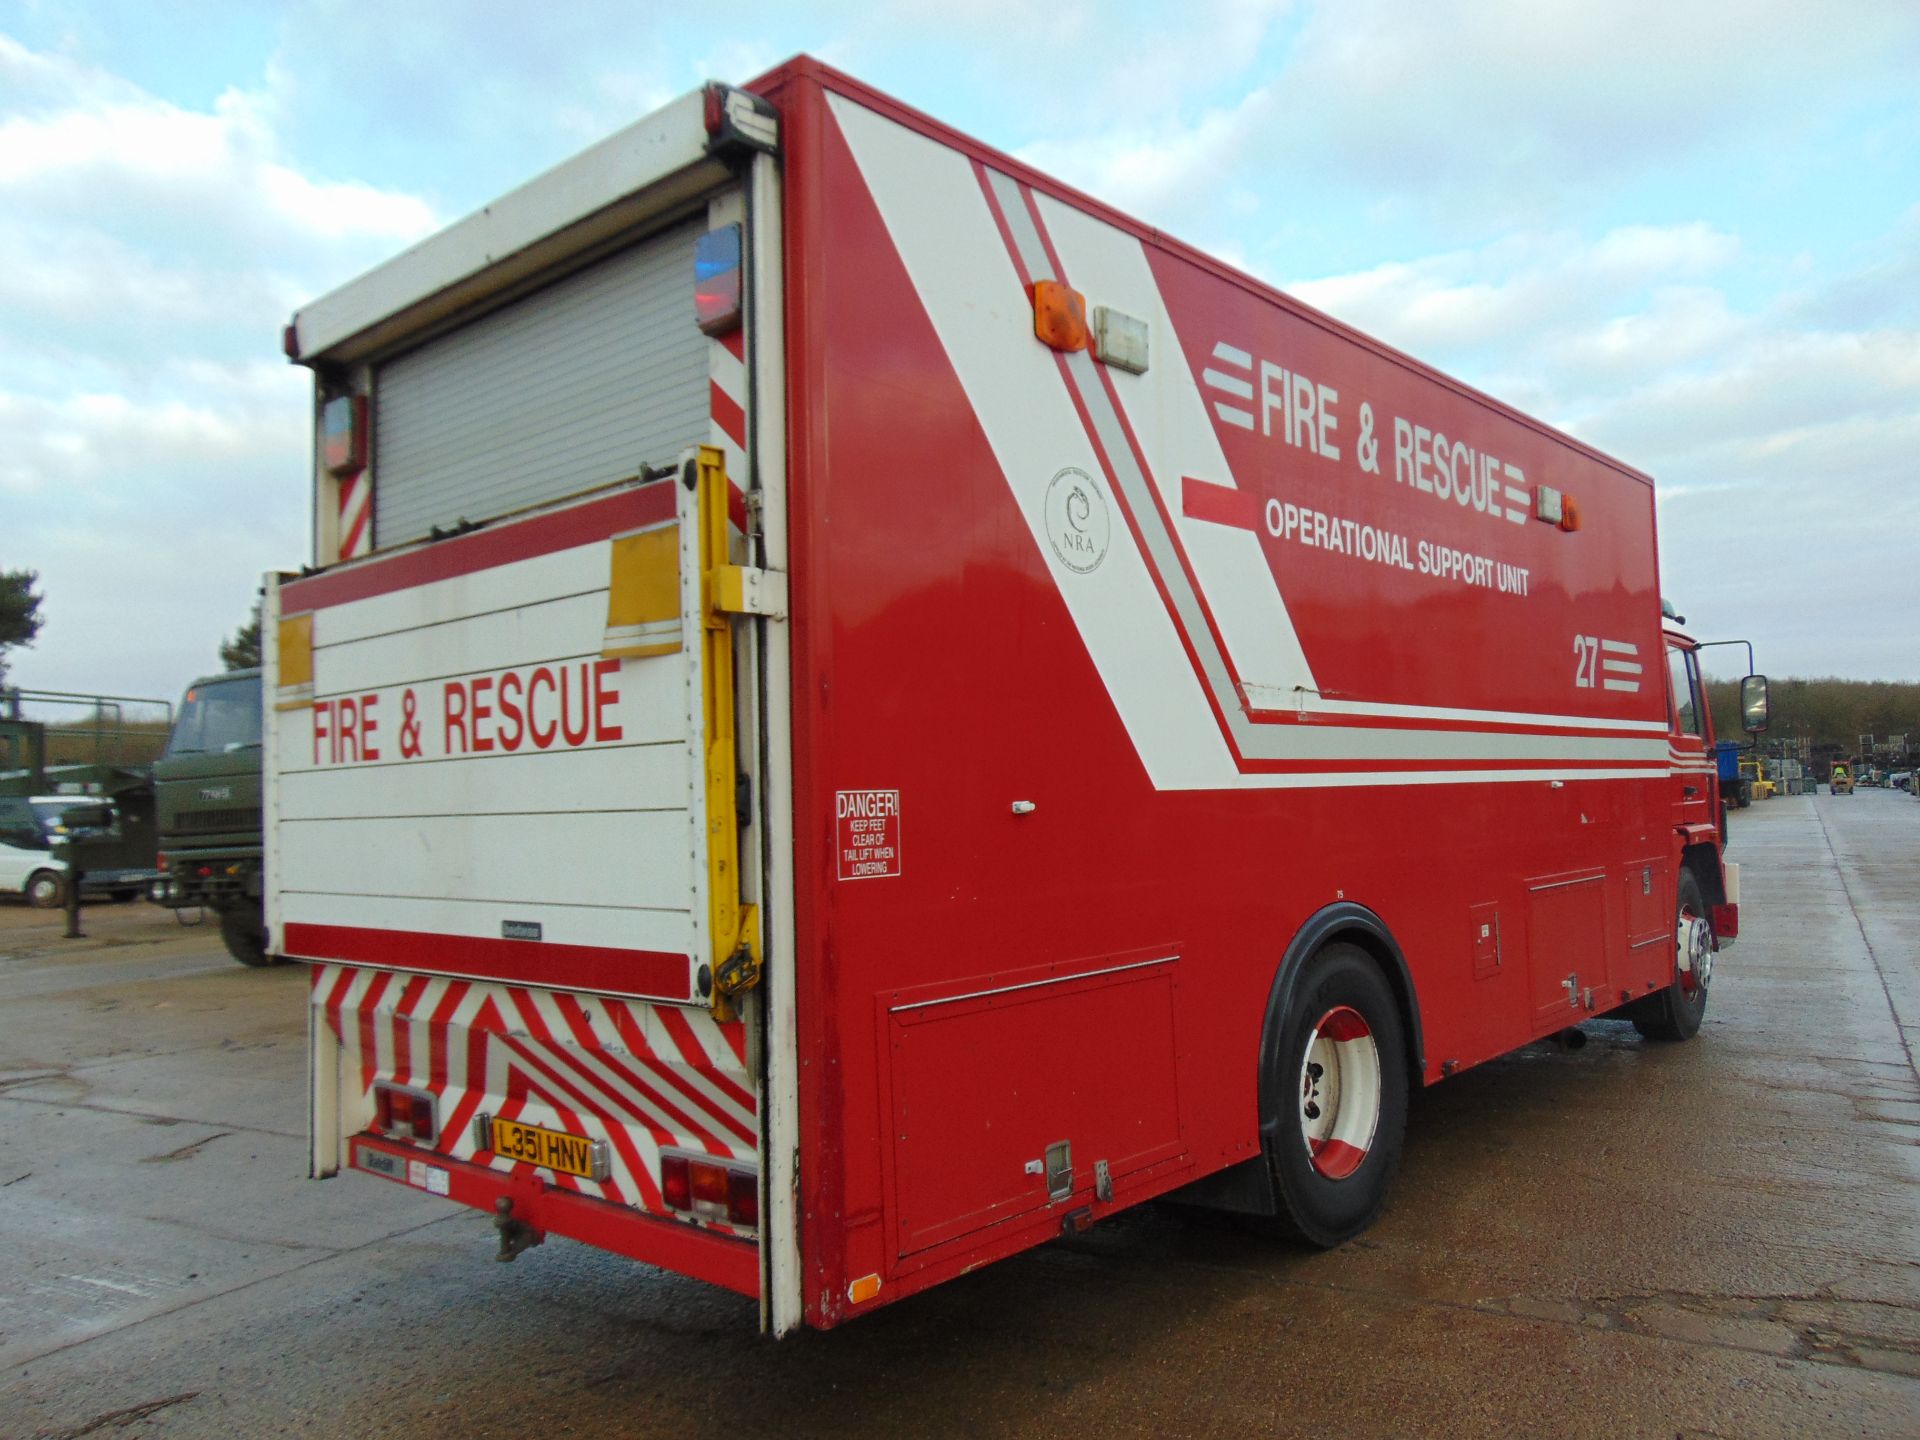 1993 Volvo FL6 18 4 x 2 Incident Response Unit complete with a 1000 Kg Tail Lift - Image 8 of 37